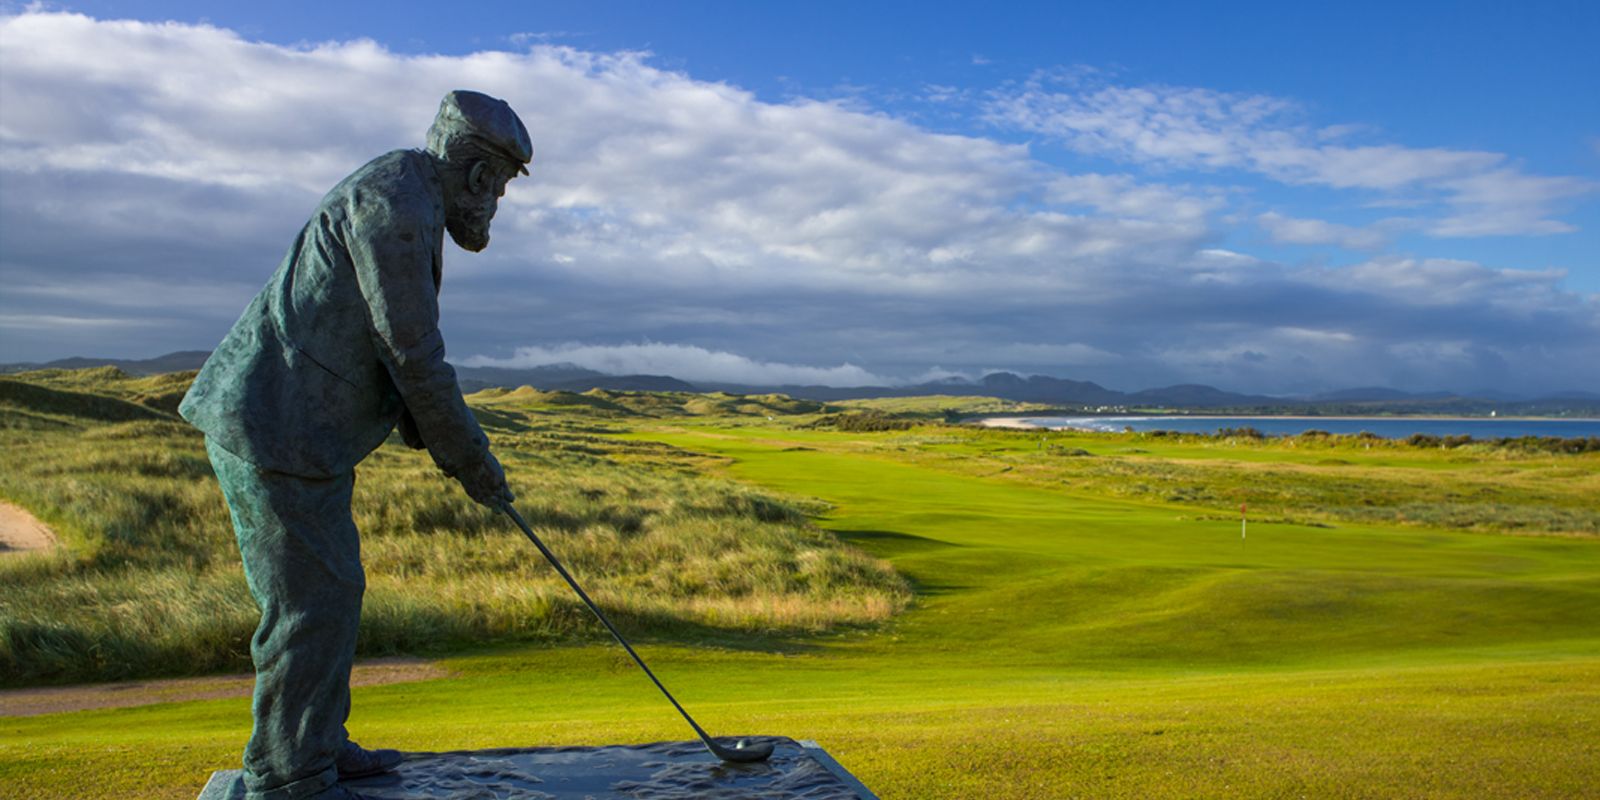 A statue of Golf architect and legend Old Tom Morris stands in front of the golf courses at Rosapenna Golf Resort, Ireland